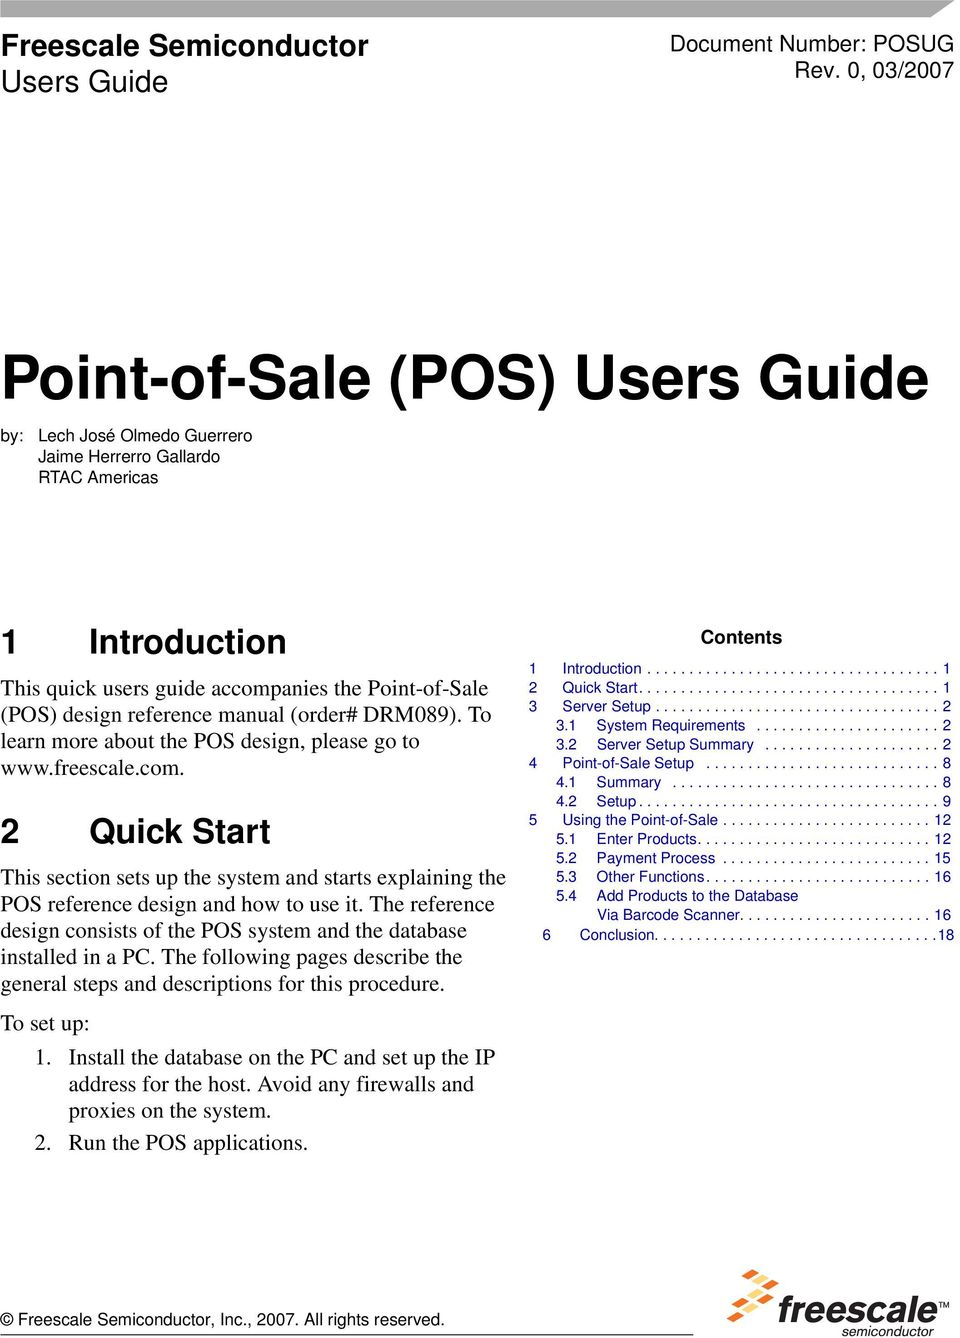 reference manual (order# DRM089). To learn more about the POS design, please go to www.freescale.com.